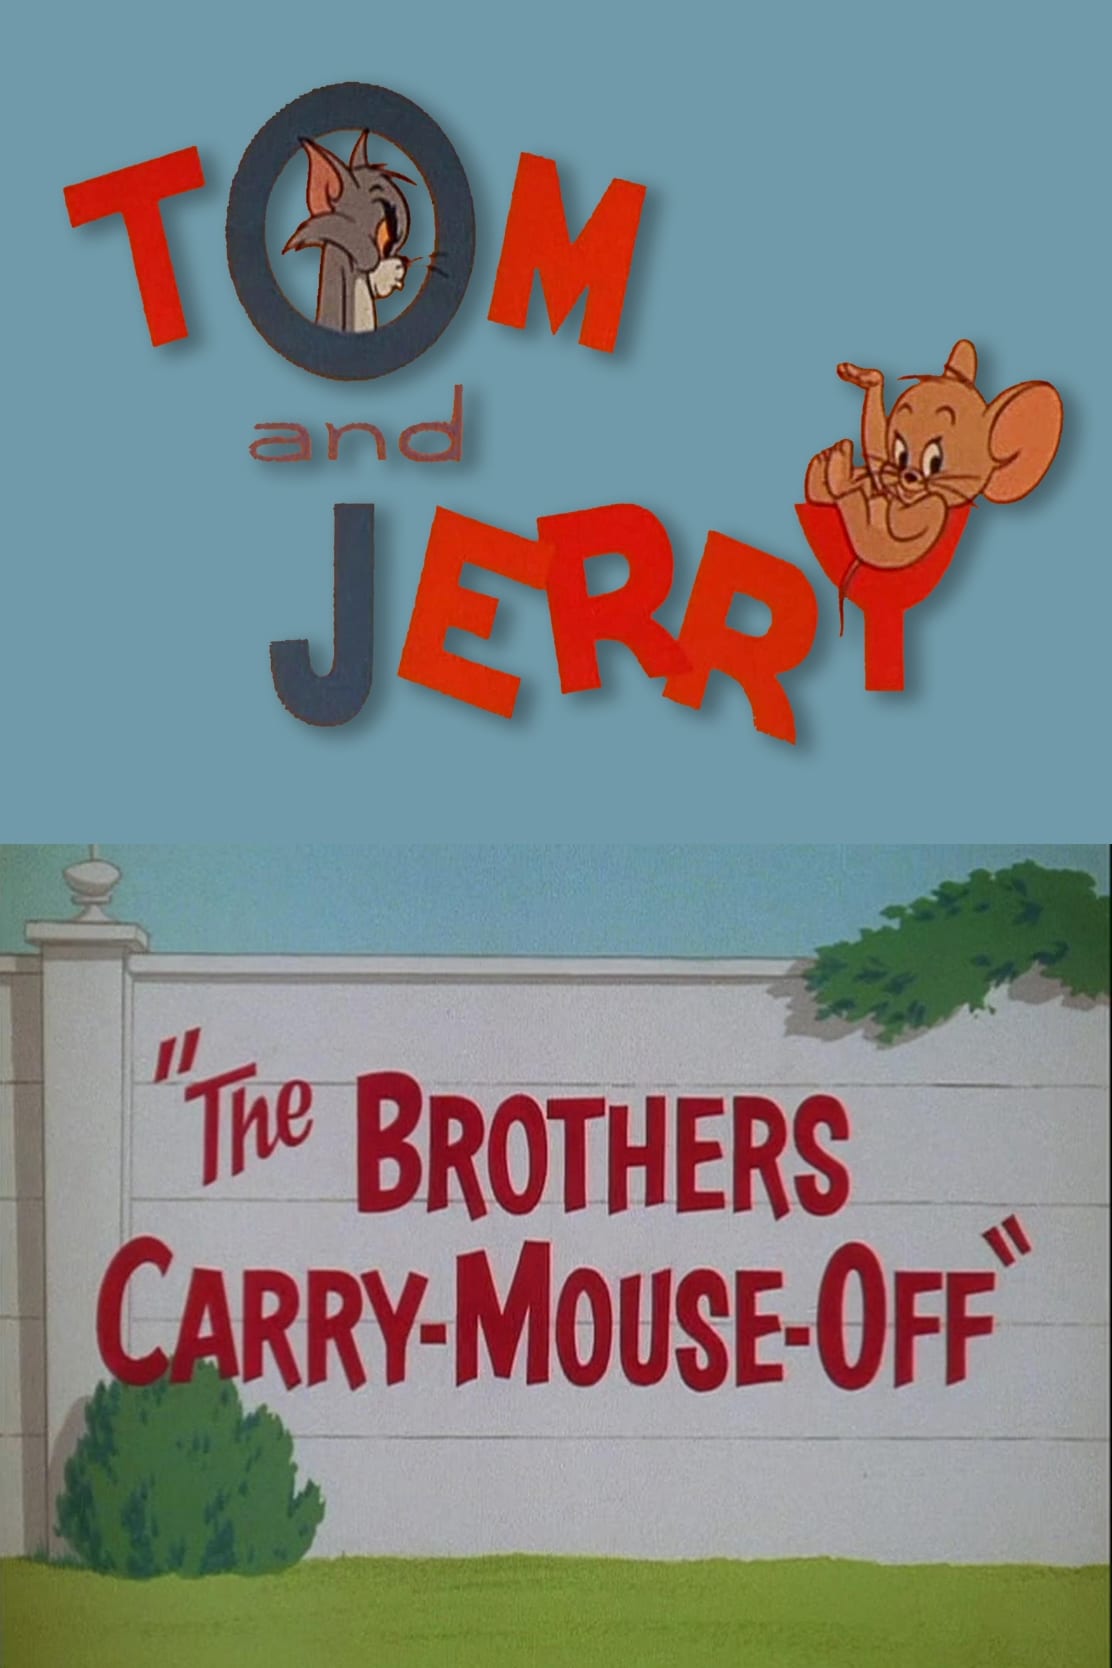 The Brothers Carry-Mouse-Off (1965)